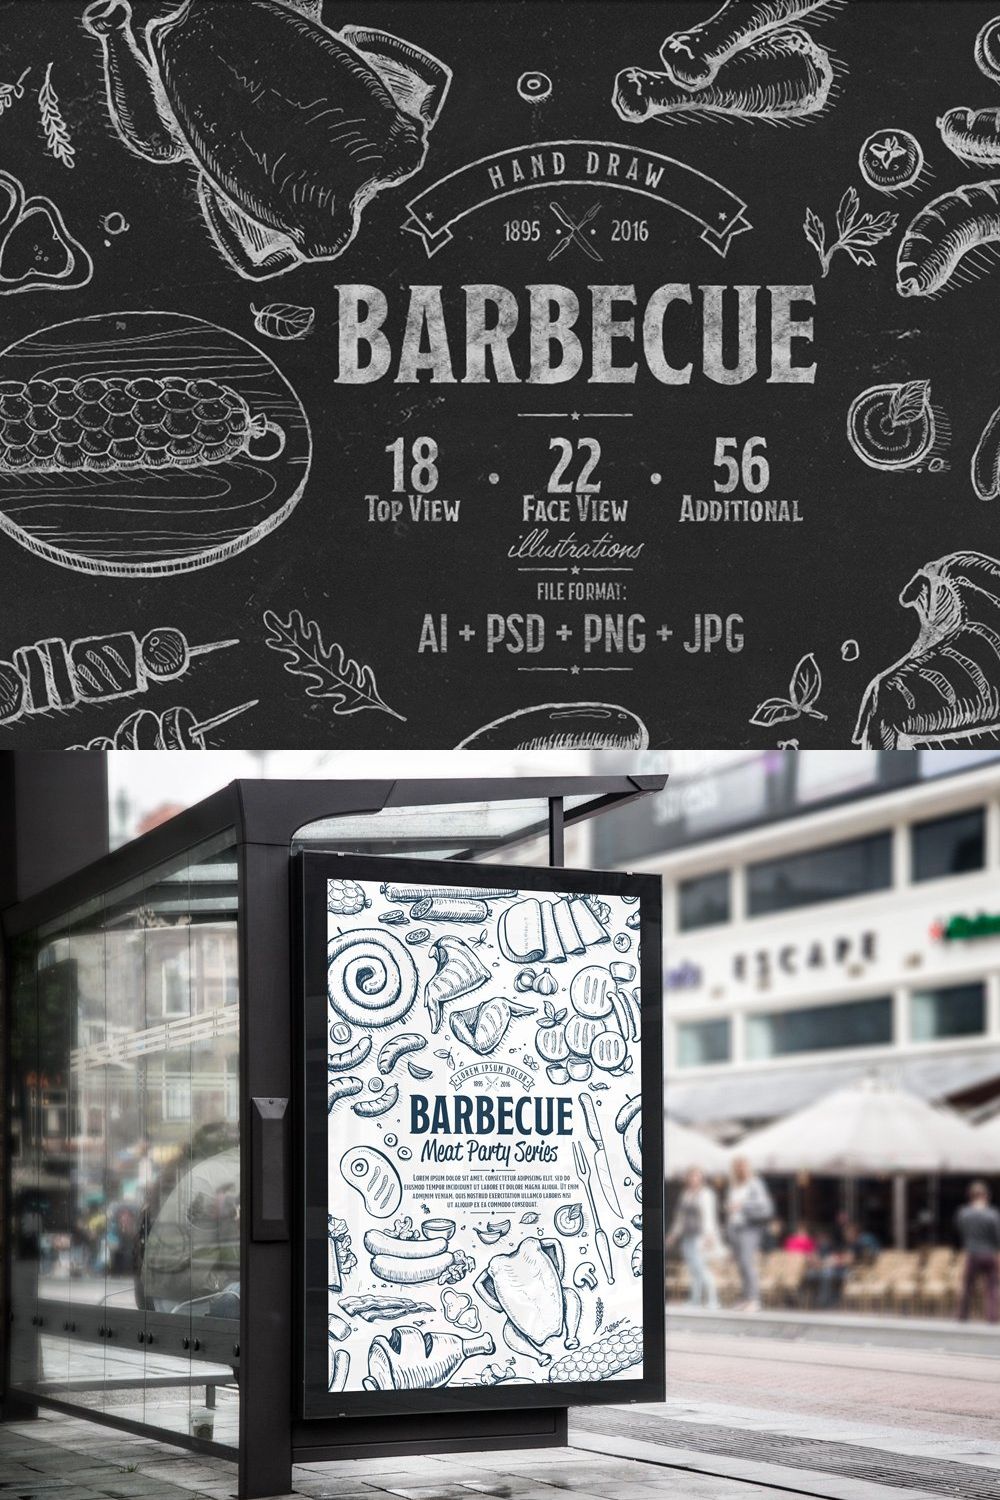 Barbecue hand drawn illustration set pinterest preview image.